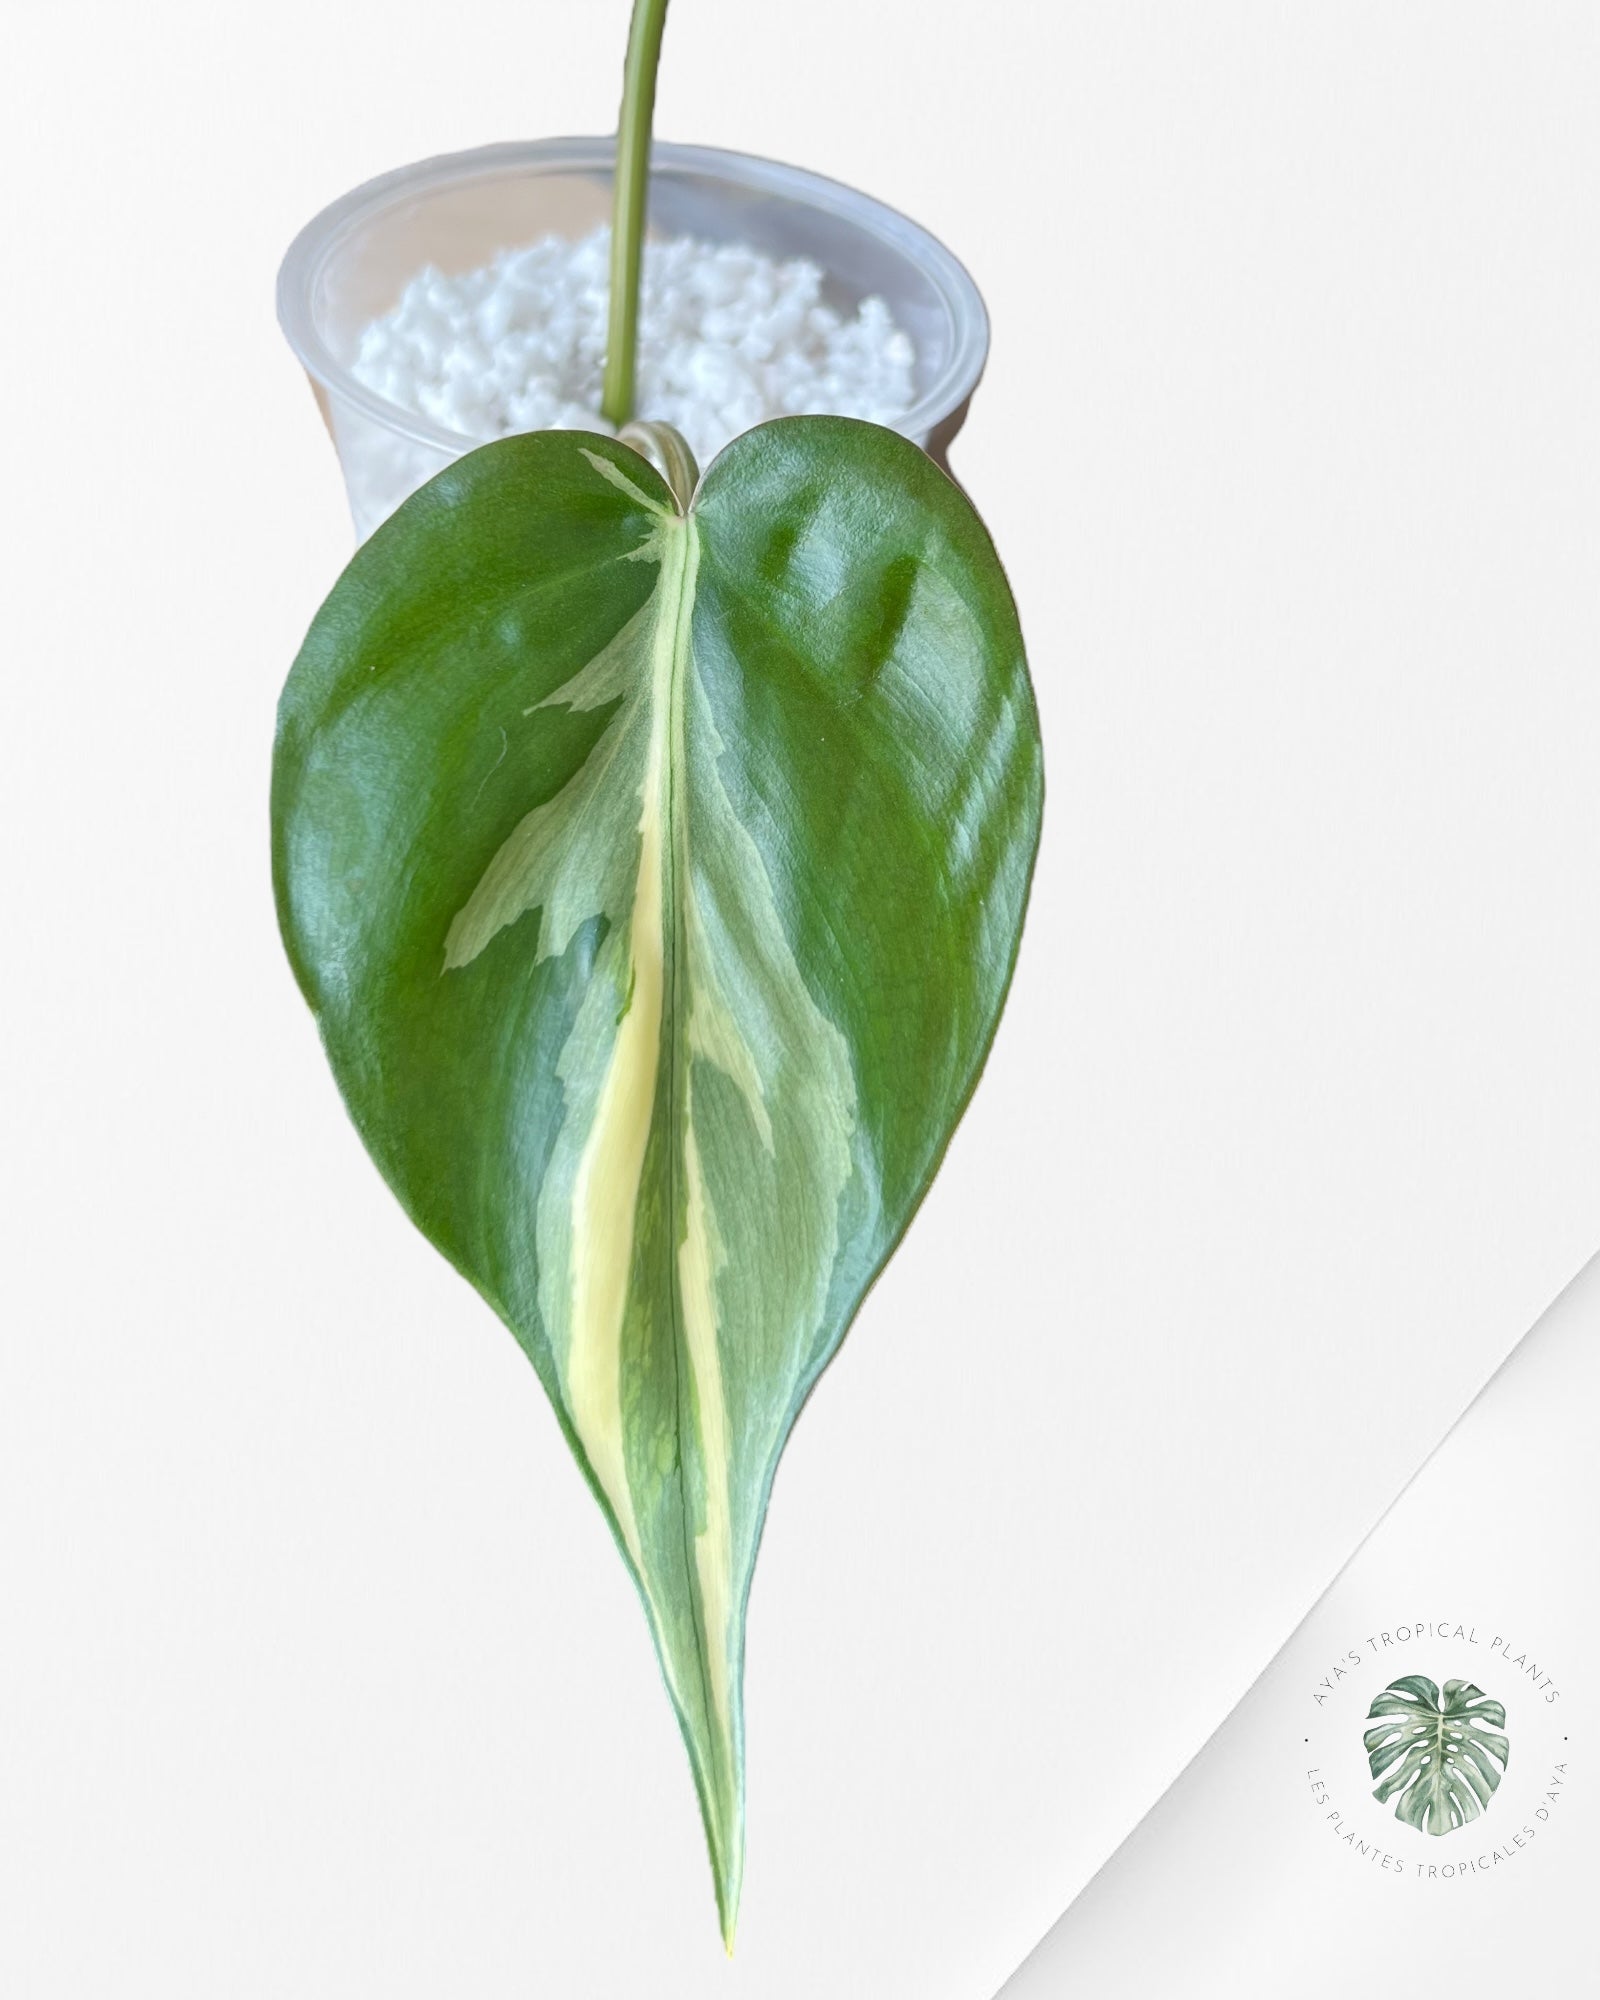 Philodendron Hederaceum 'Rio'-2222